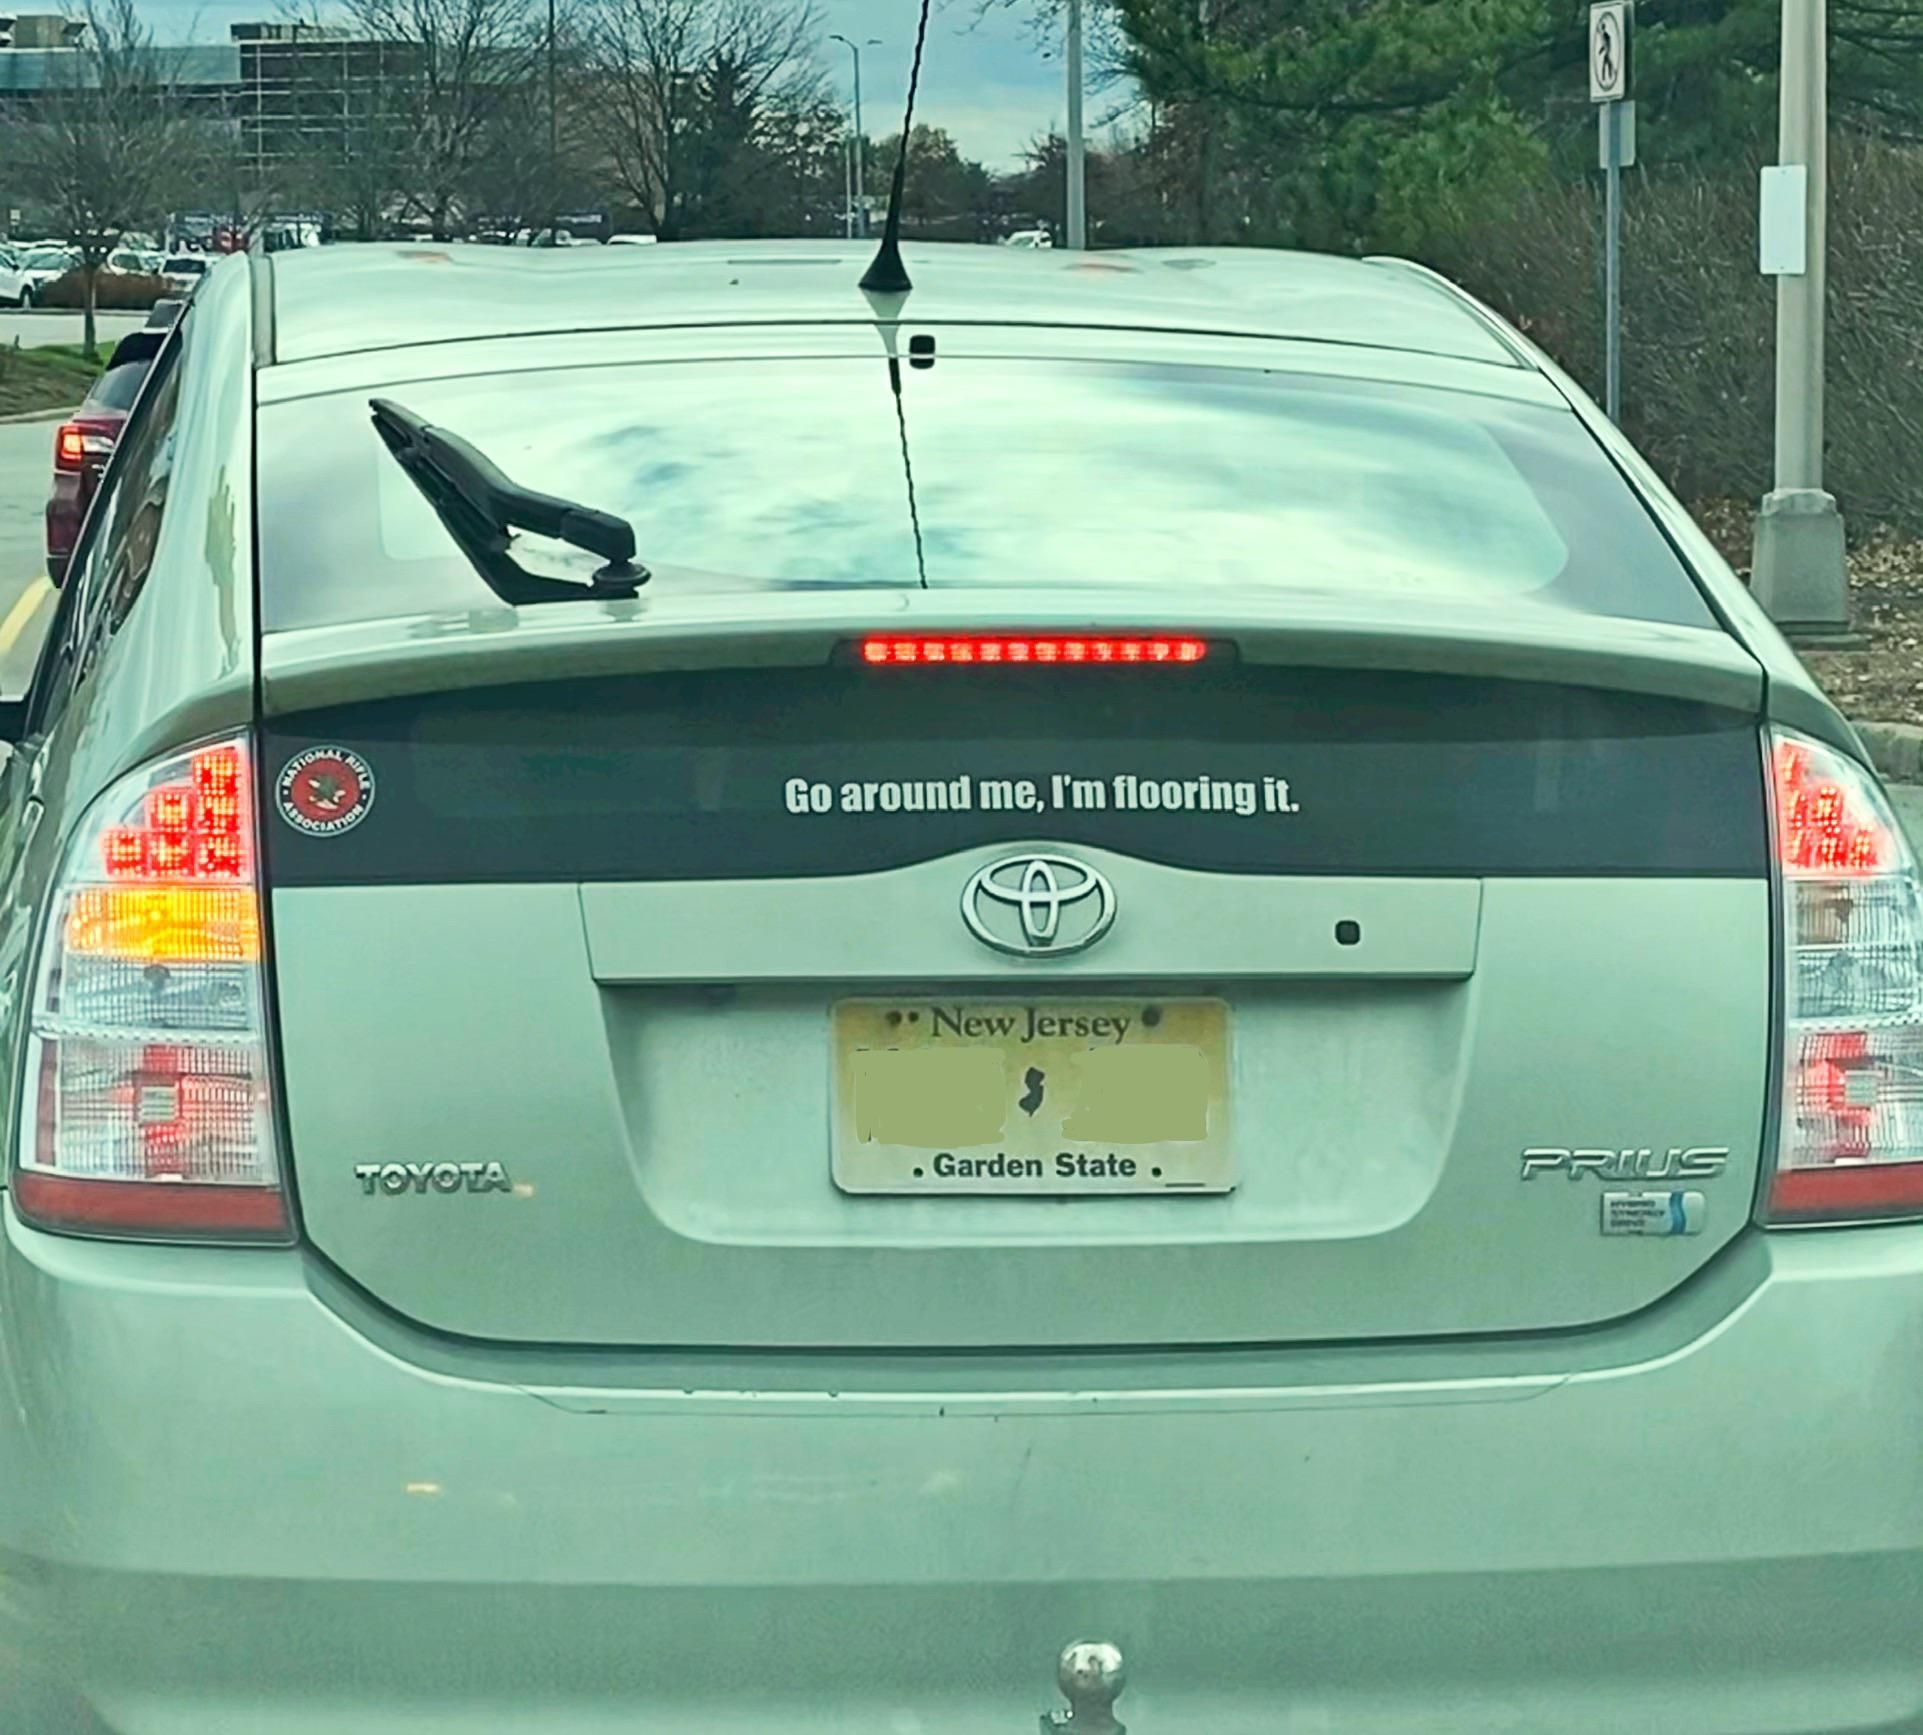 This bumper sticker on a Prius.